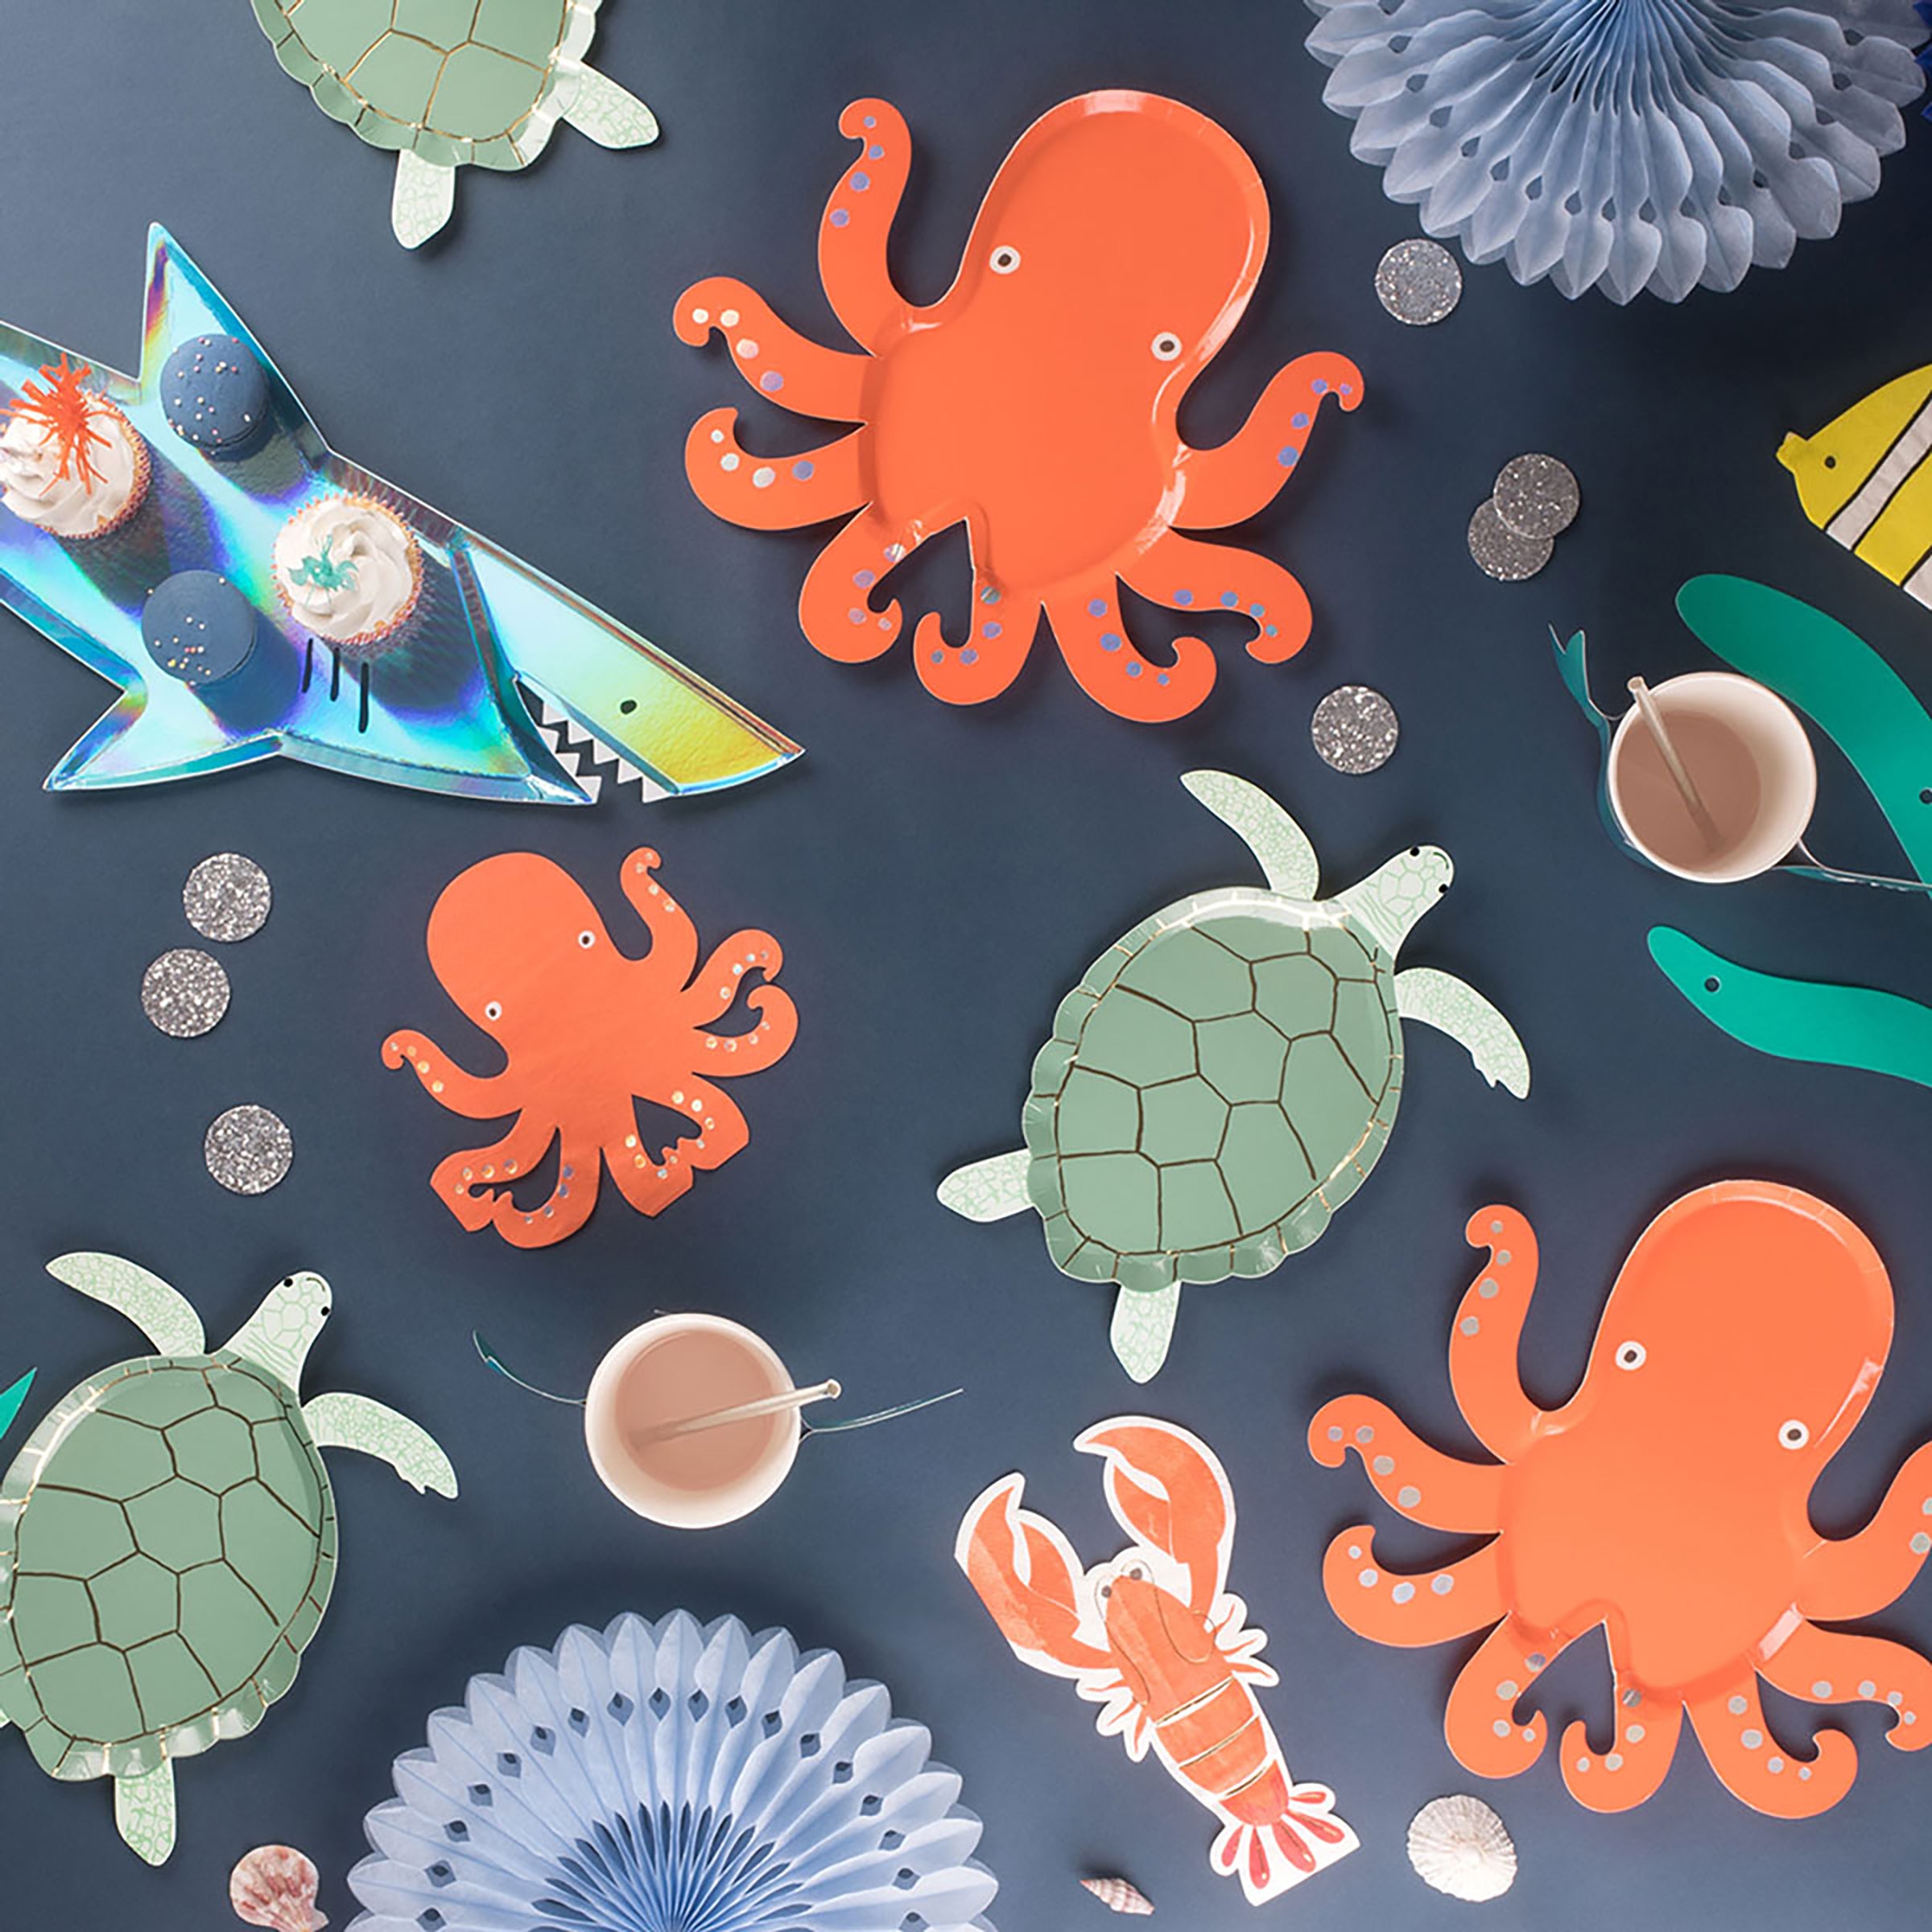 Our party napkins, in the shape of turtles, are perfect as cocktail napkins or for an under-the-sea birthday party.